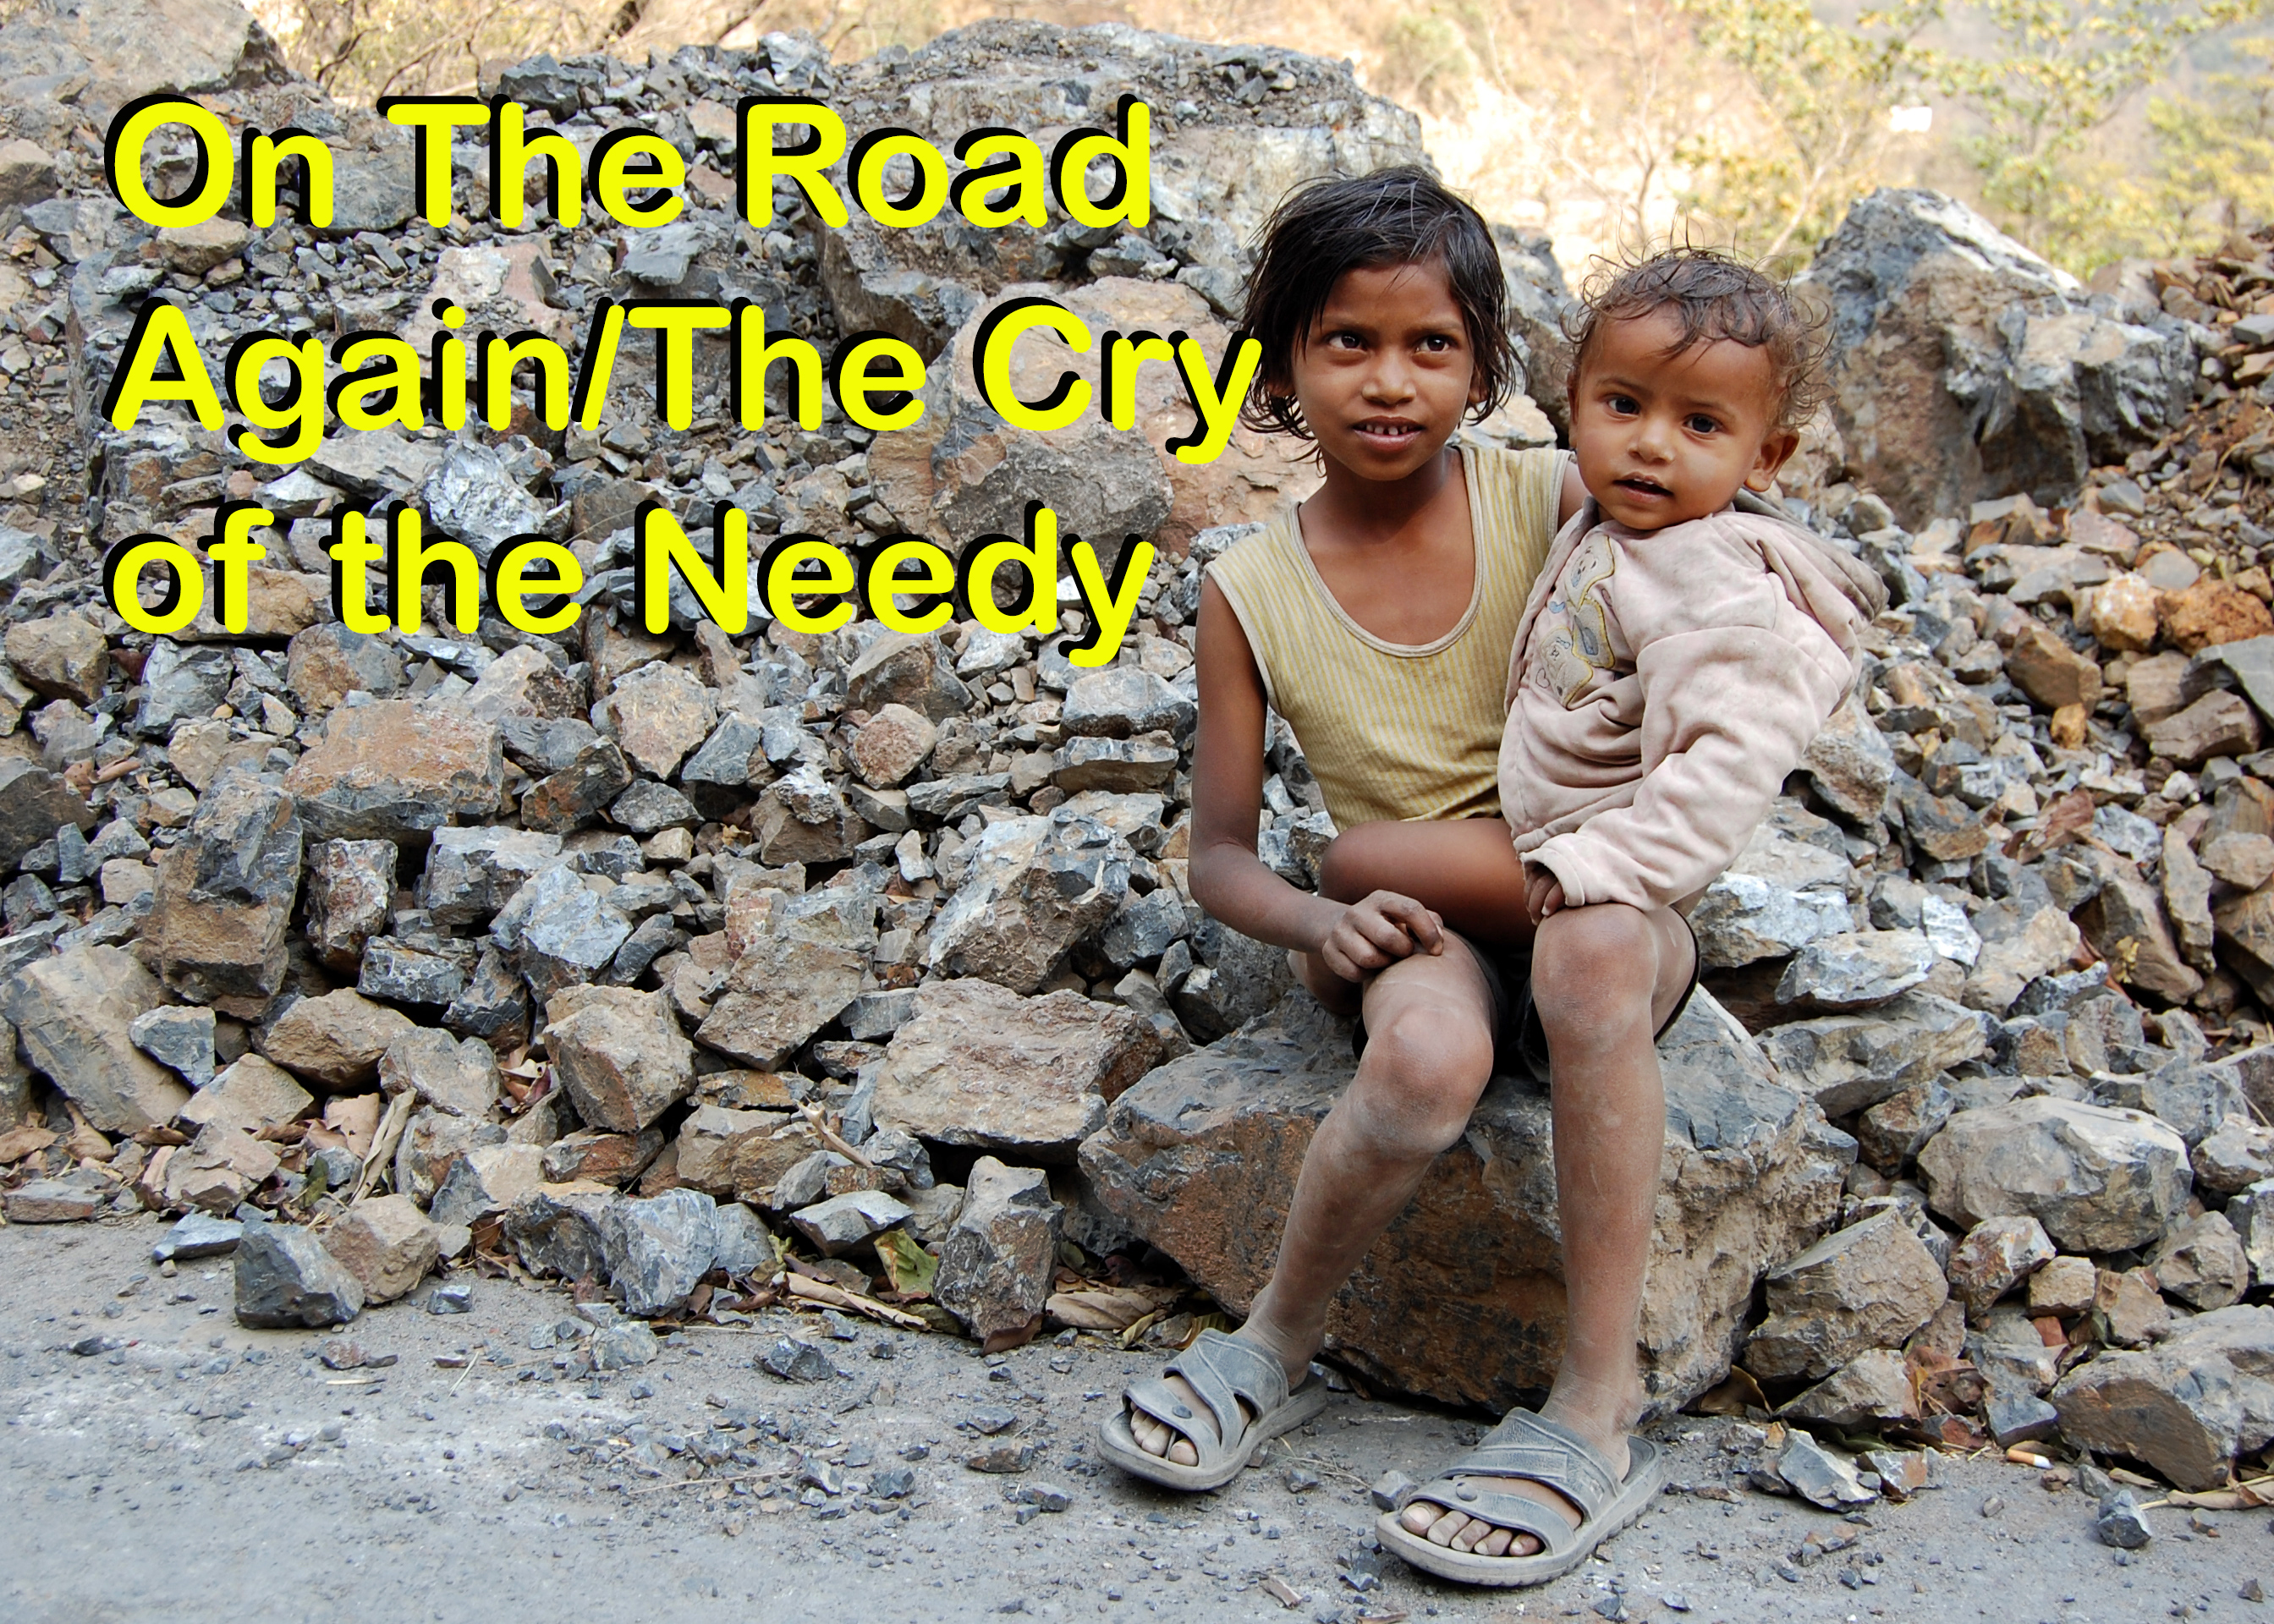 On The Road Again/ The Cry of the Needy